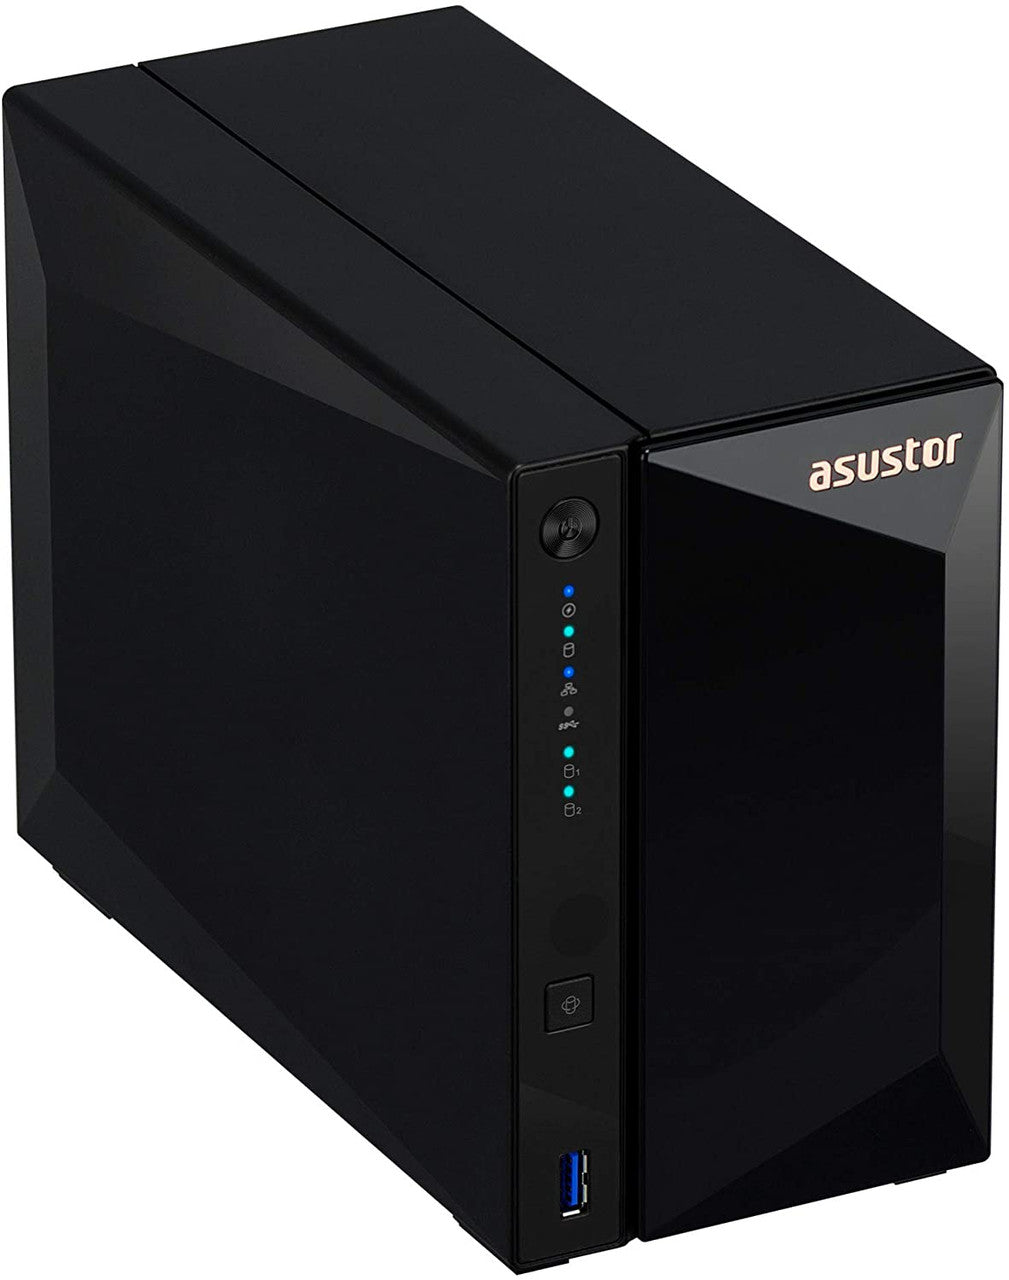 Asustor AS3302T 2-Bay Drivestor 2 PRO NAS with 2GB RAM and 28TB (2x14TB) Western Digital RED PRO Drives Fully Assembled and Tested